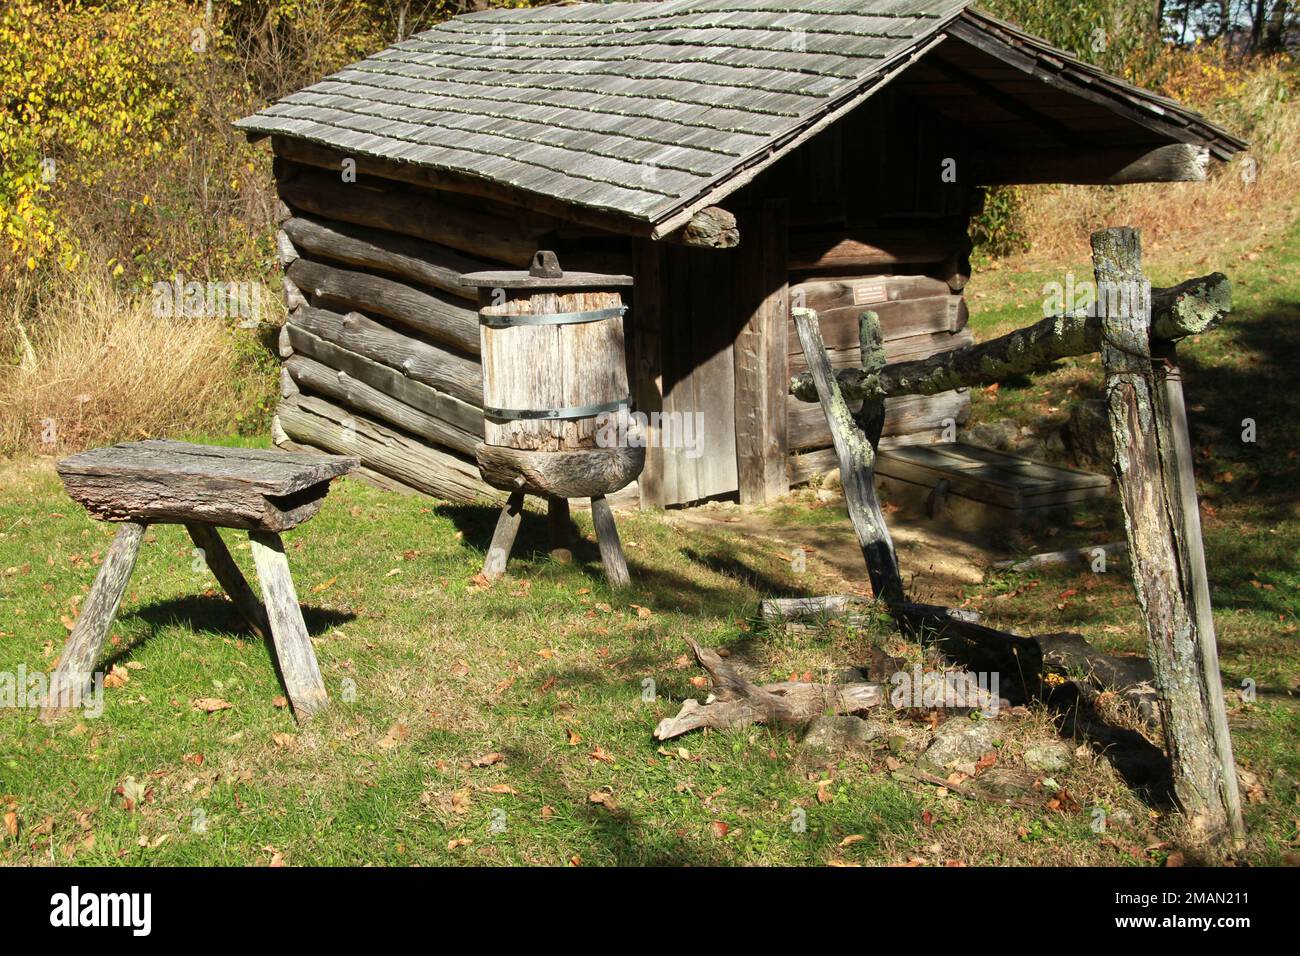 Old structure at the historical Johnson Farm in Virginia's Blue Ridge Parkway, USA. Stock Photo